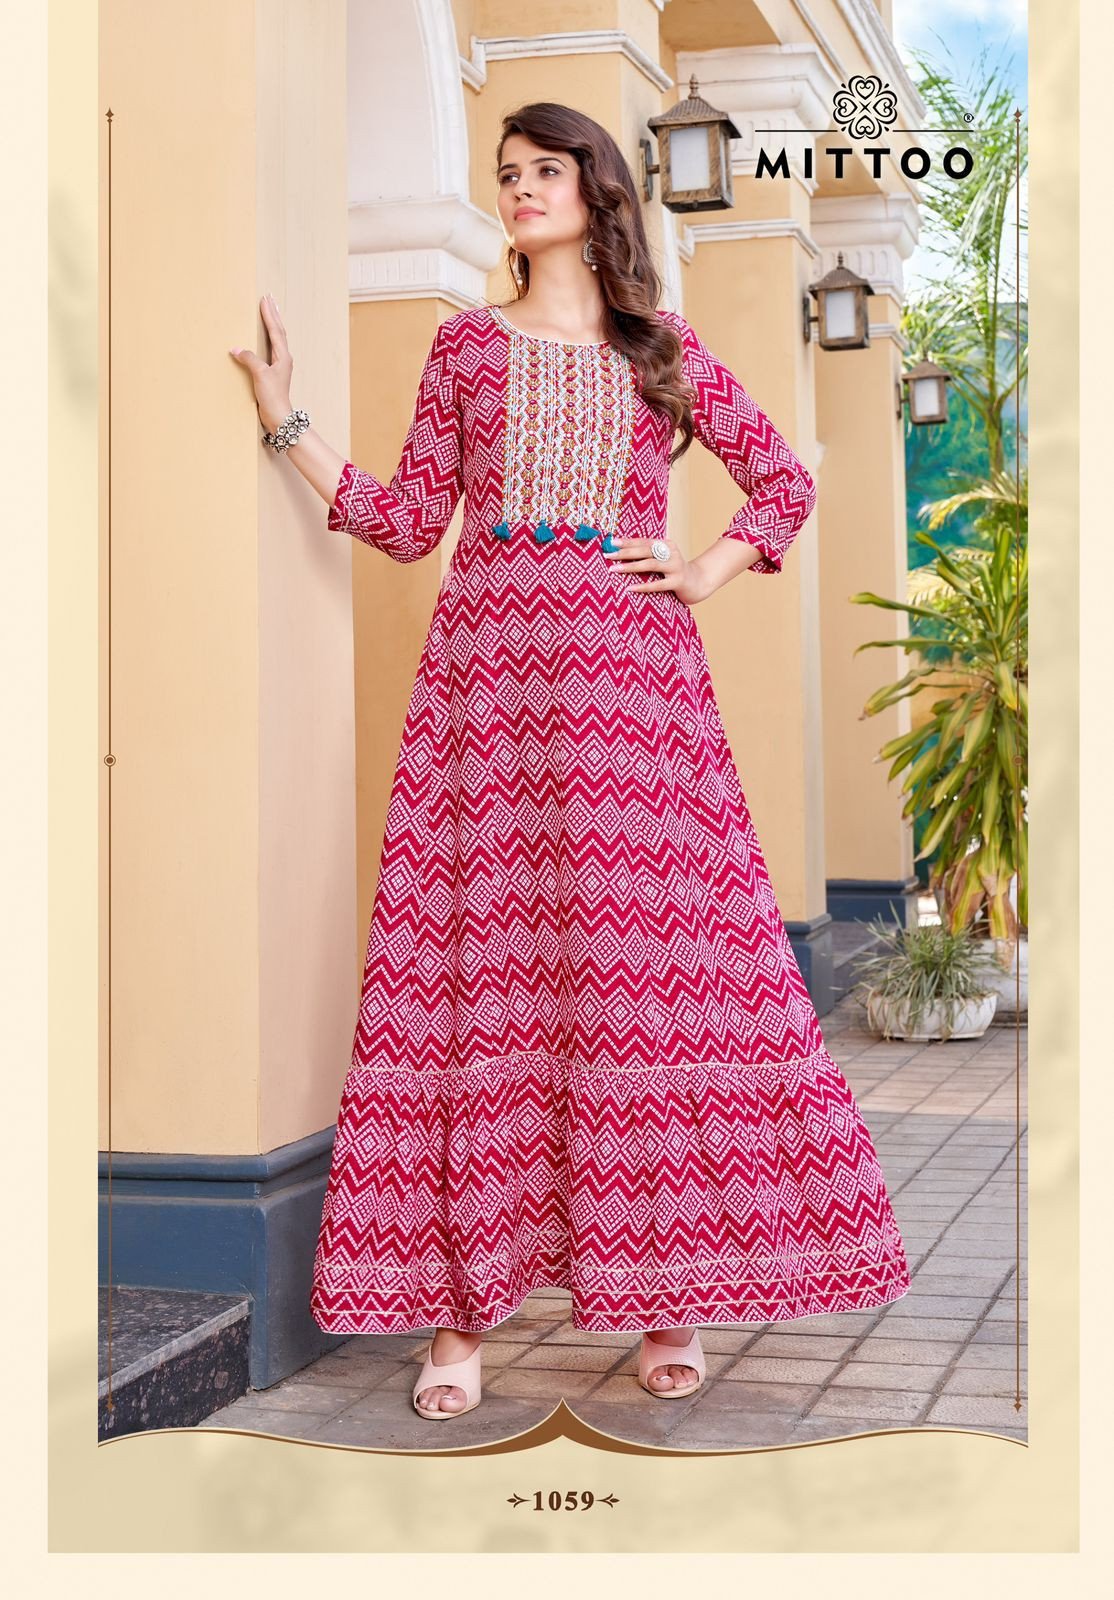 Top online shopping sites to buy a kurtis in India